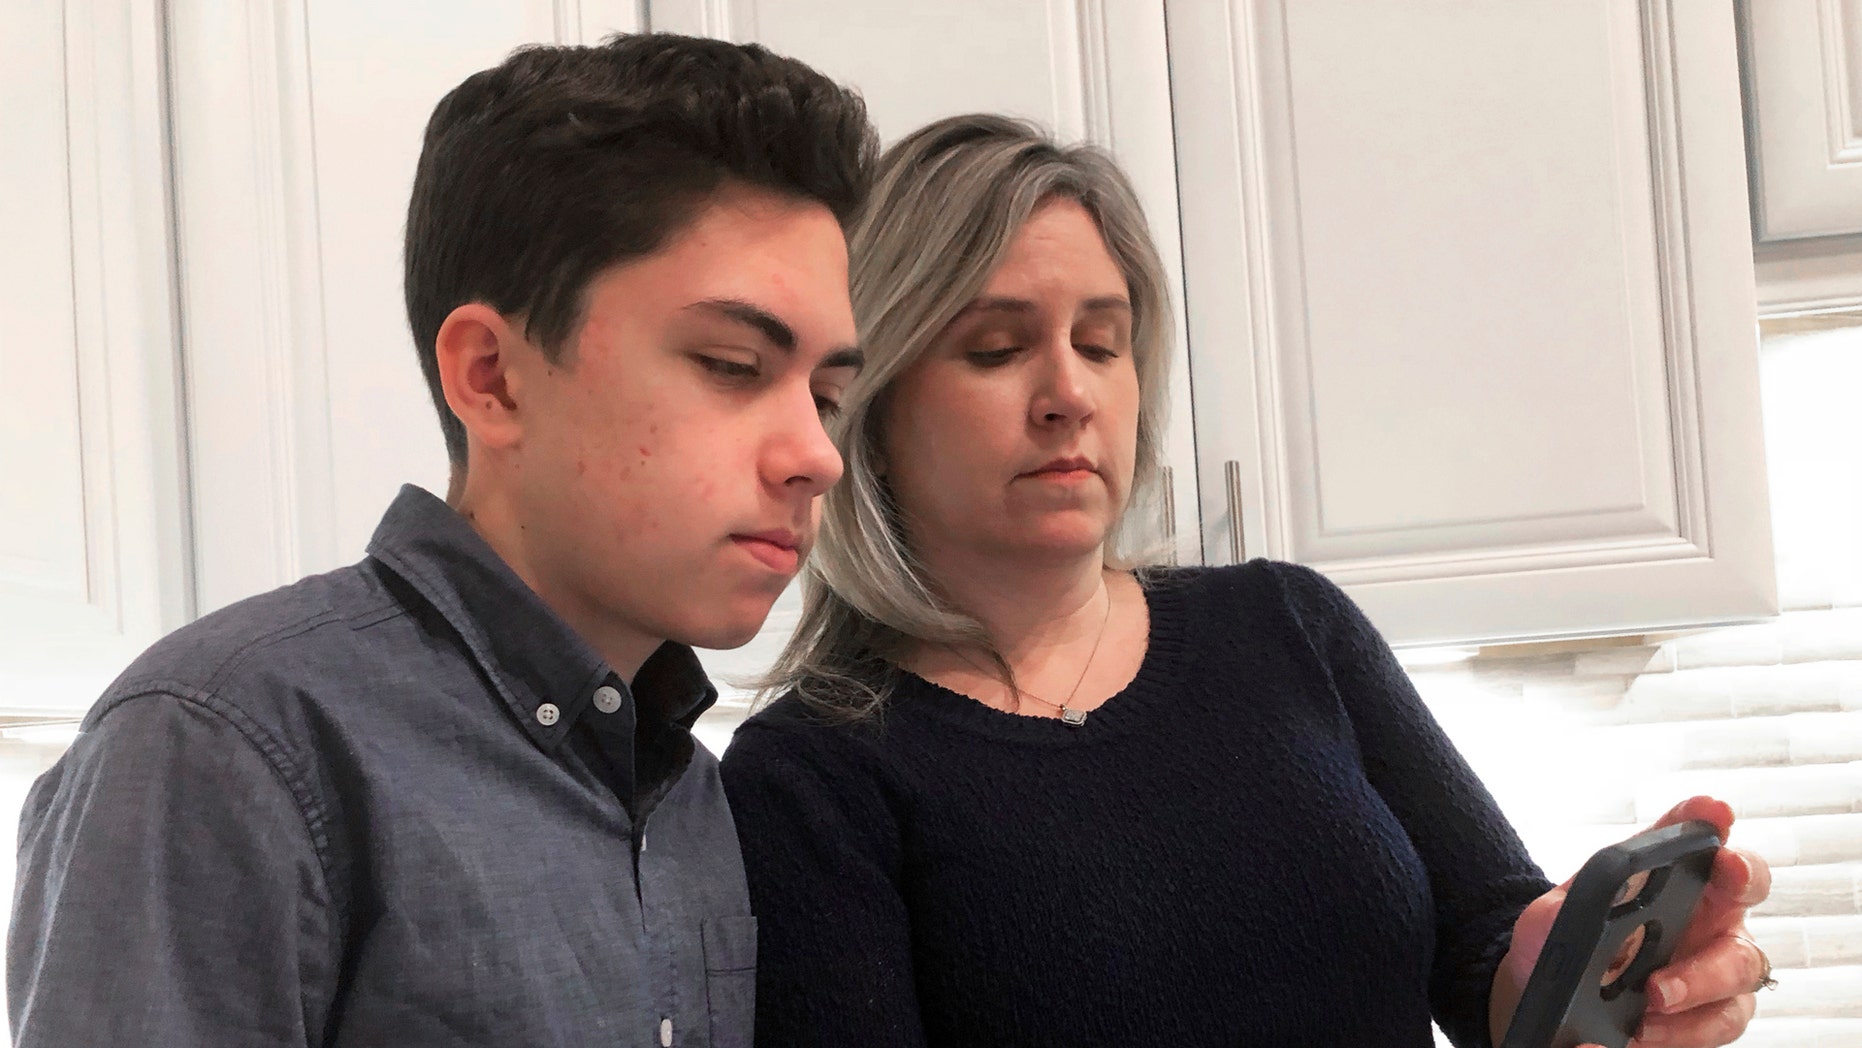 ARCHIVE-In this photo of January 31, 2019, Grant Thompson and his mother, Michele, look at an iPhone in family kitchen in Tucson, Arizona, on Thursday, January 31, 2019. (AP Photo / Brian Skoloff, Dossier)